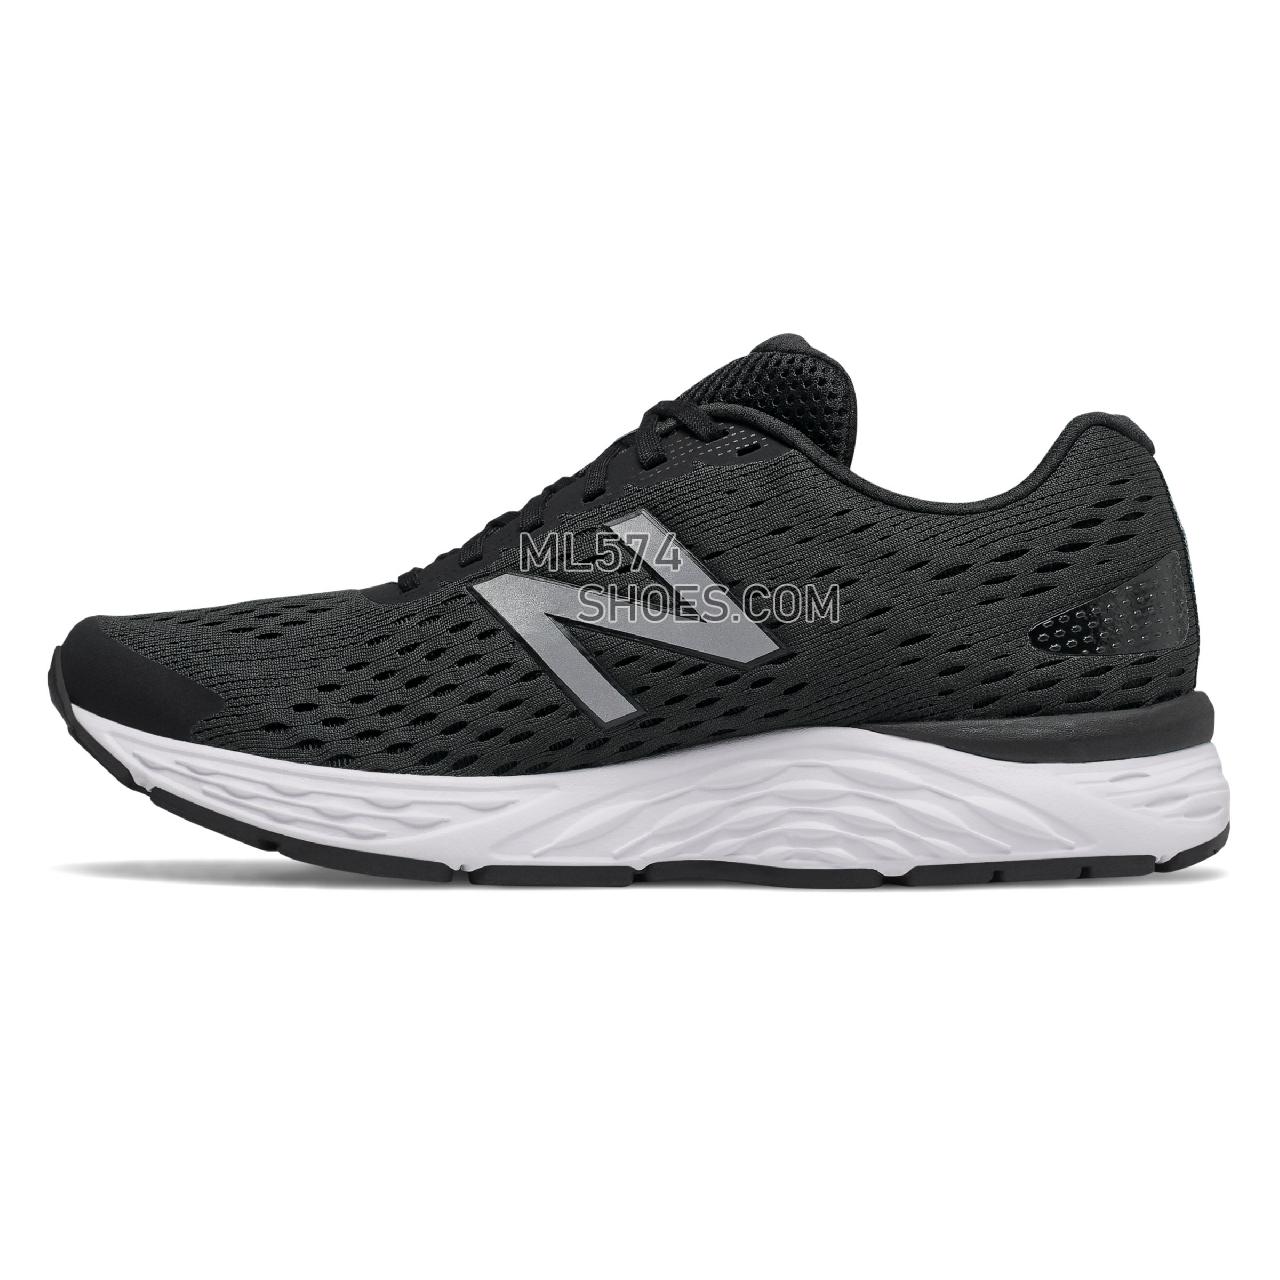 New Balance 680v6 - Men's Classic Sneakers - Black with Silver Metallic and White - M680LK6